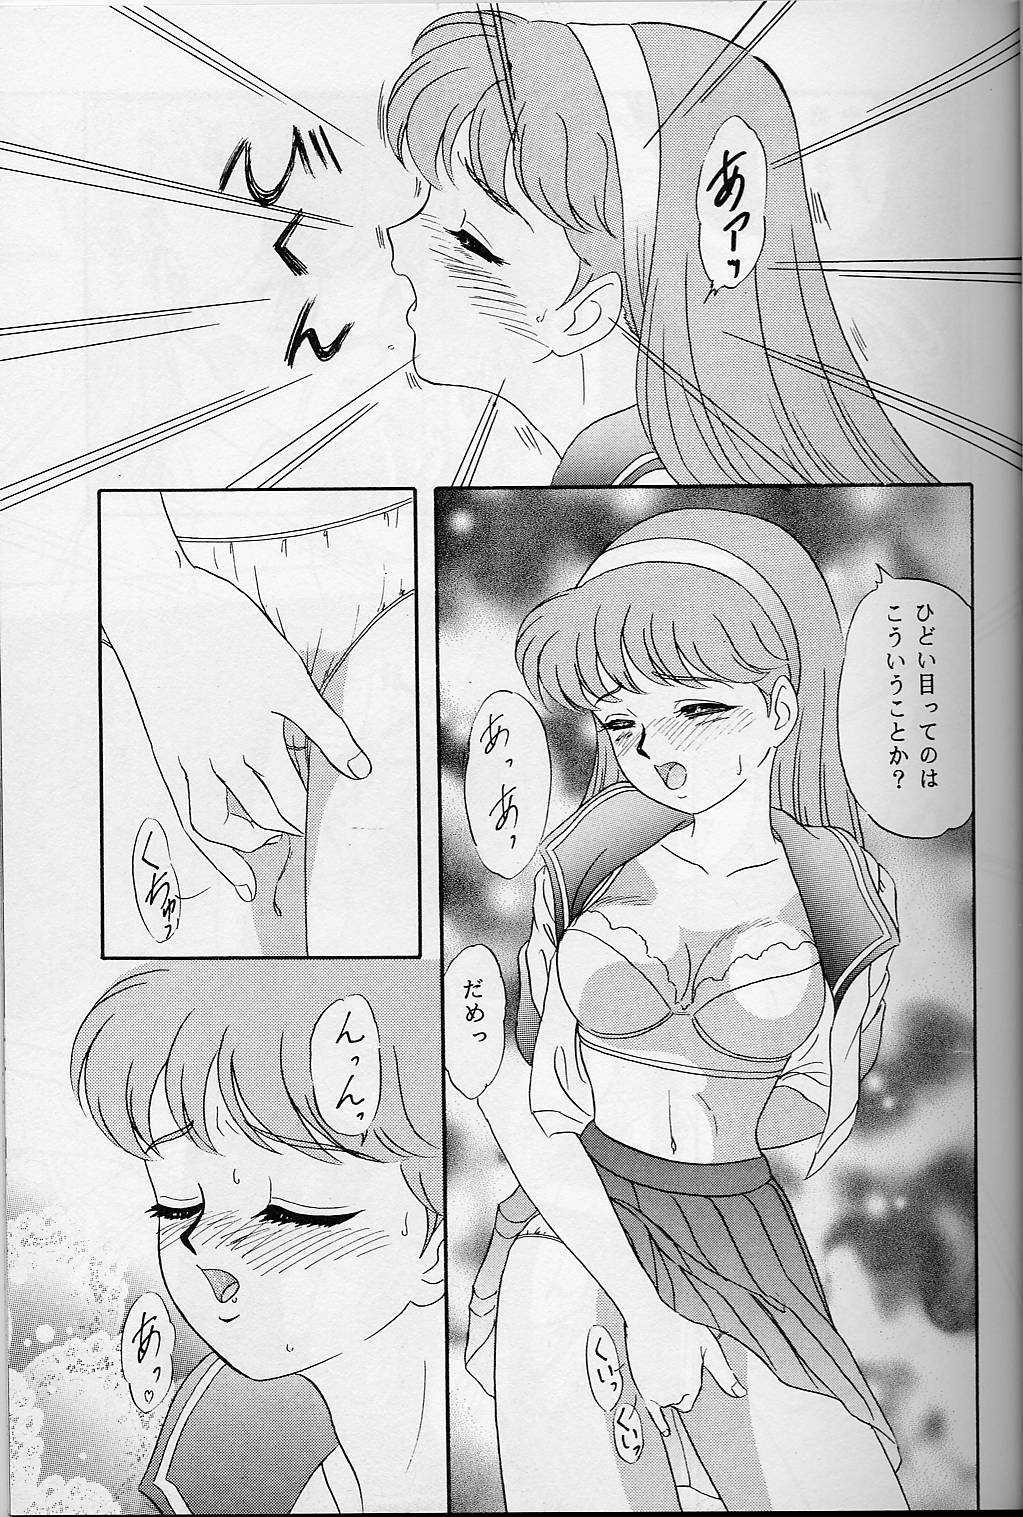 Glam Lunch Time 5 - Tokimeki memorial Old Vs Young - Page 8